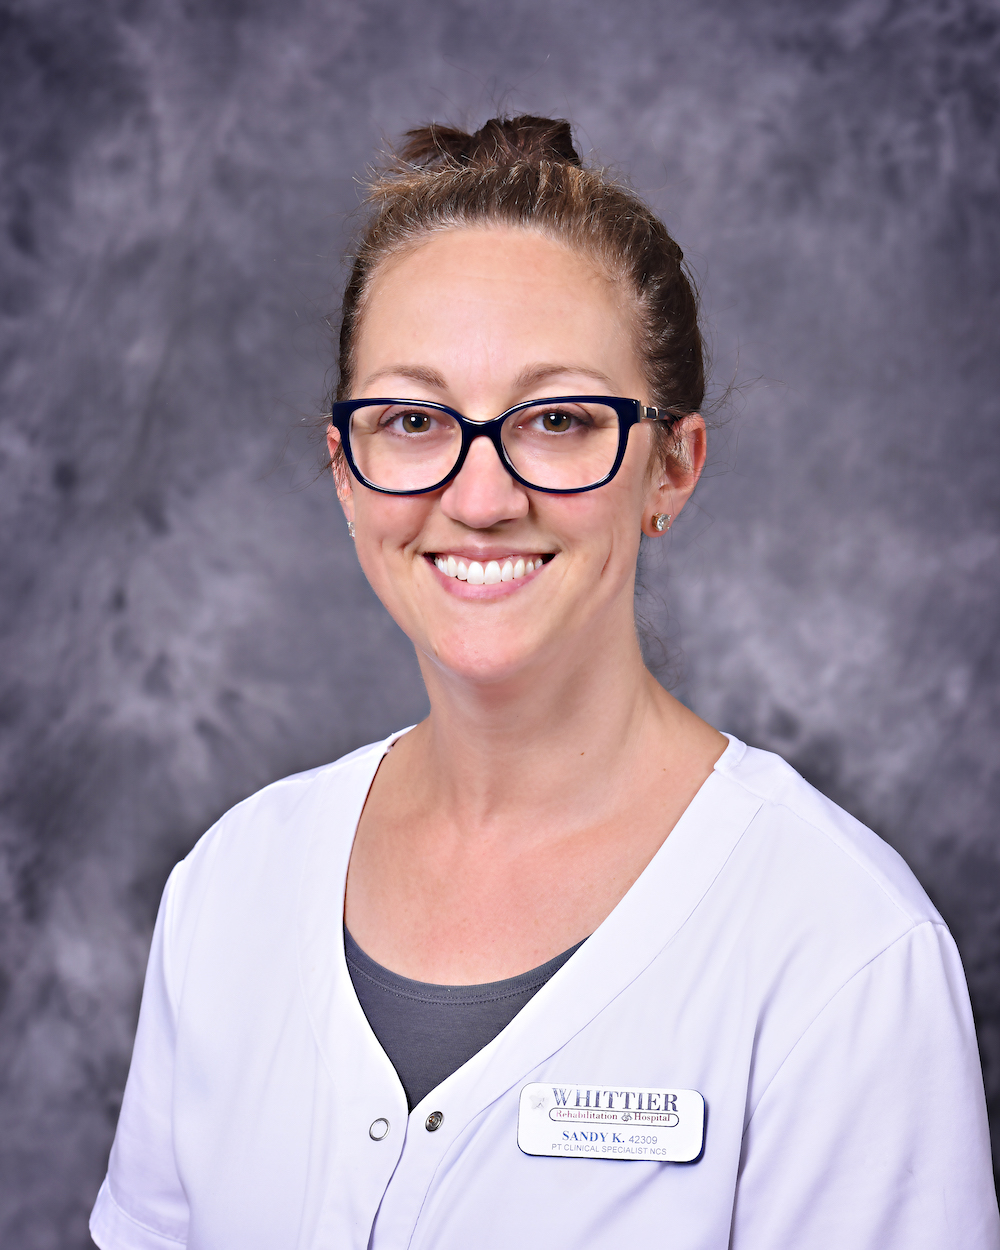 Sandra Kiley, MSPT, NCS is a Board Certified Neurology Clinical Specialist in Physical Therapy